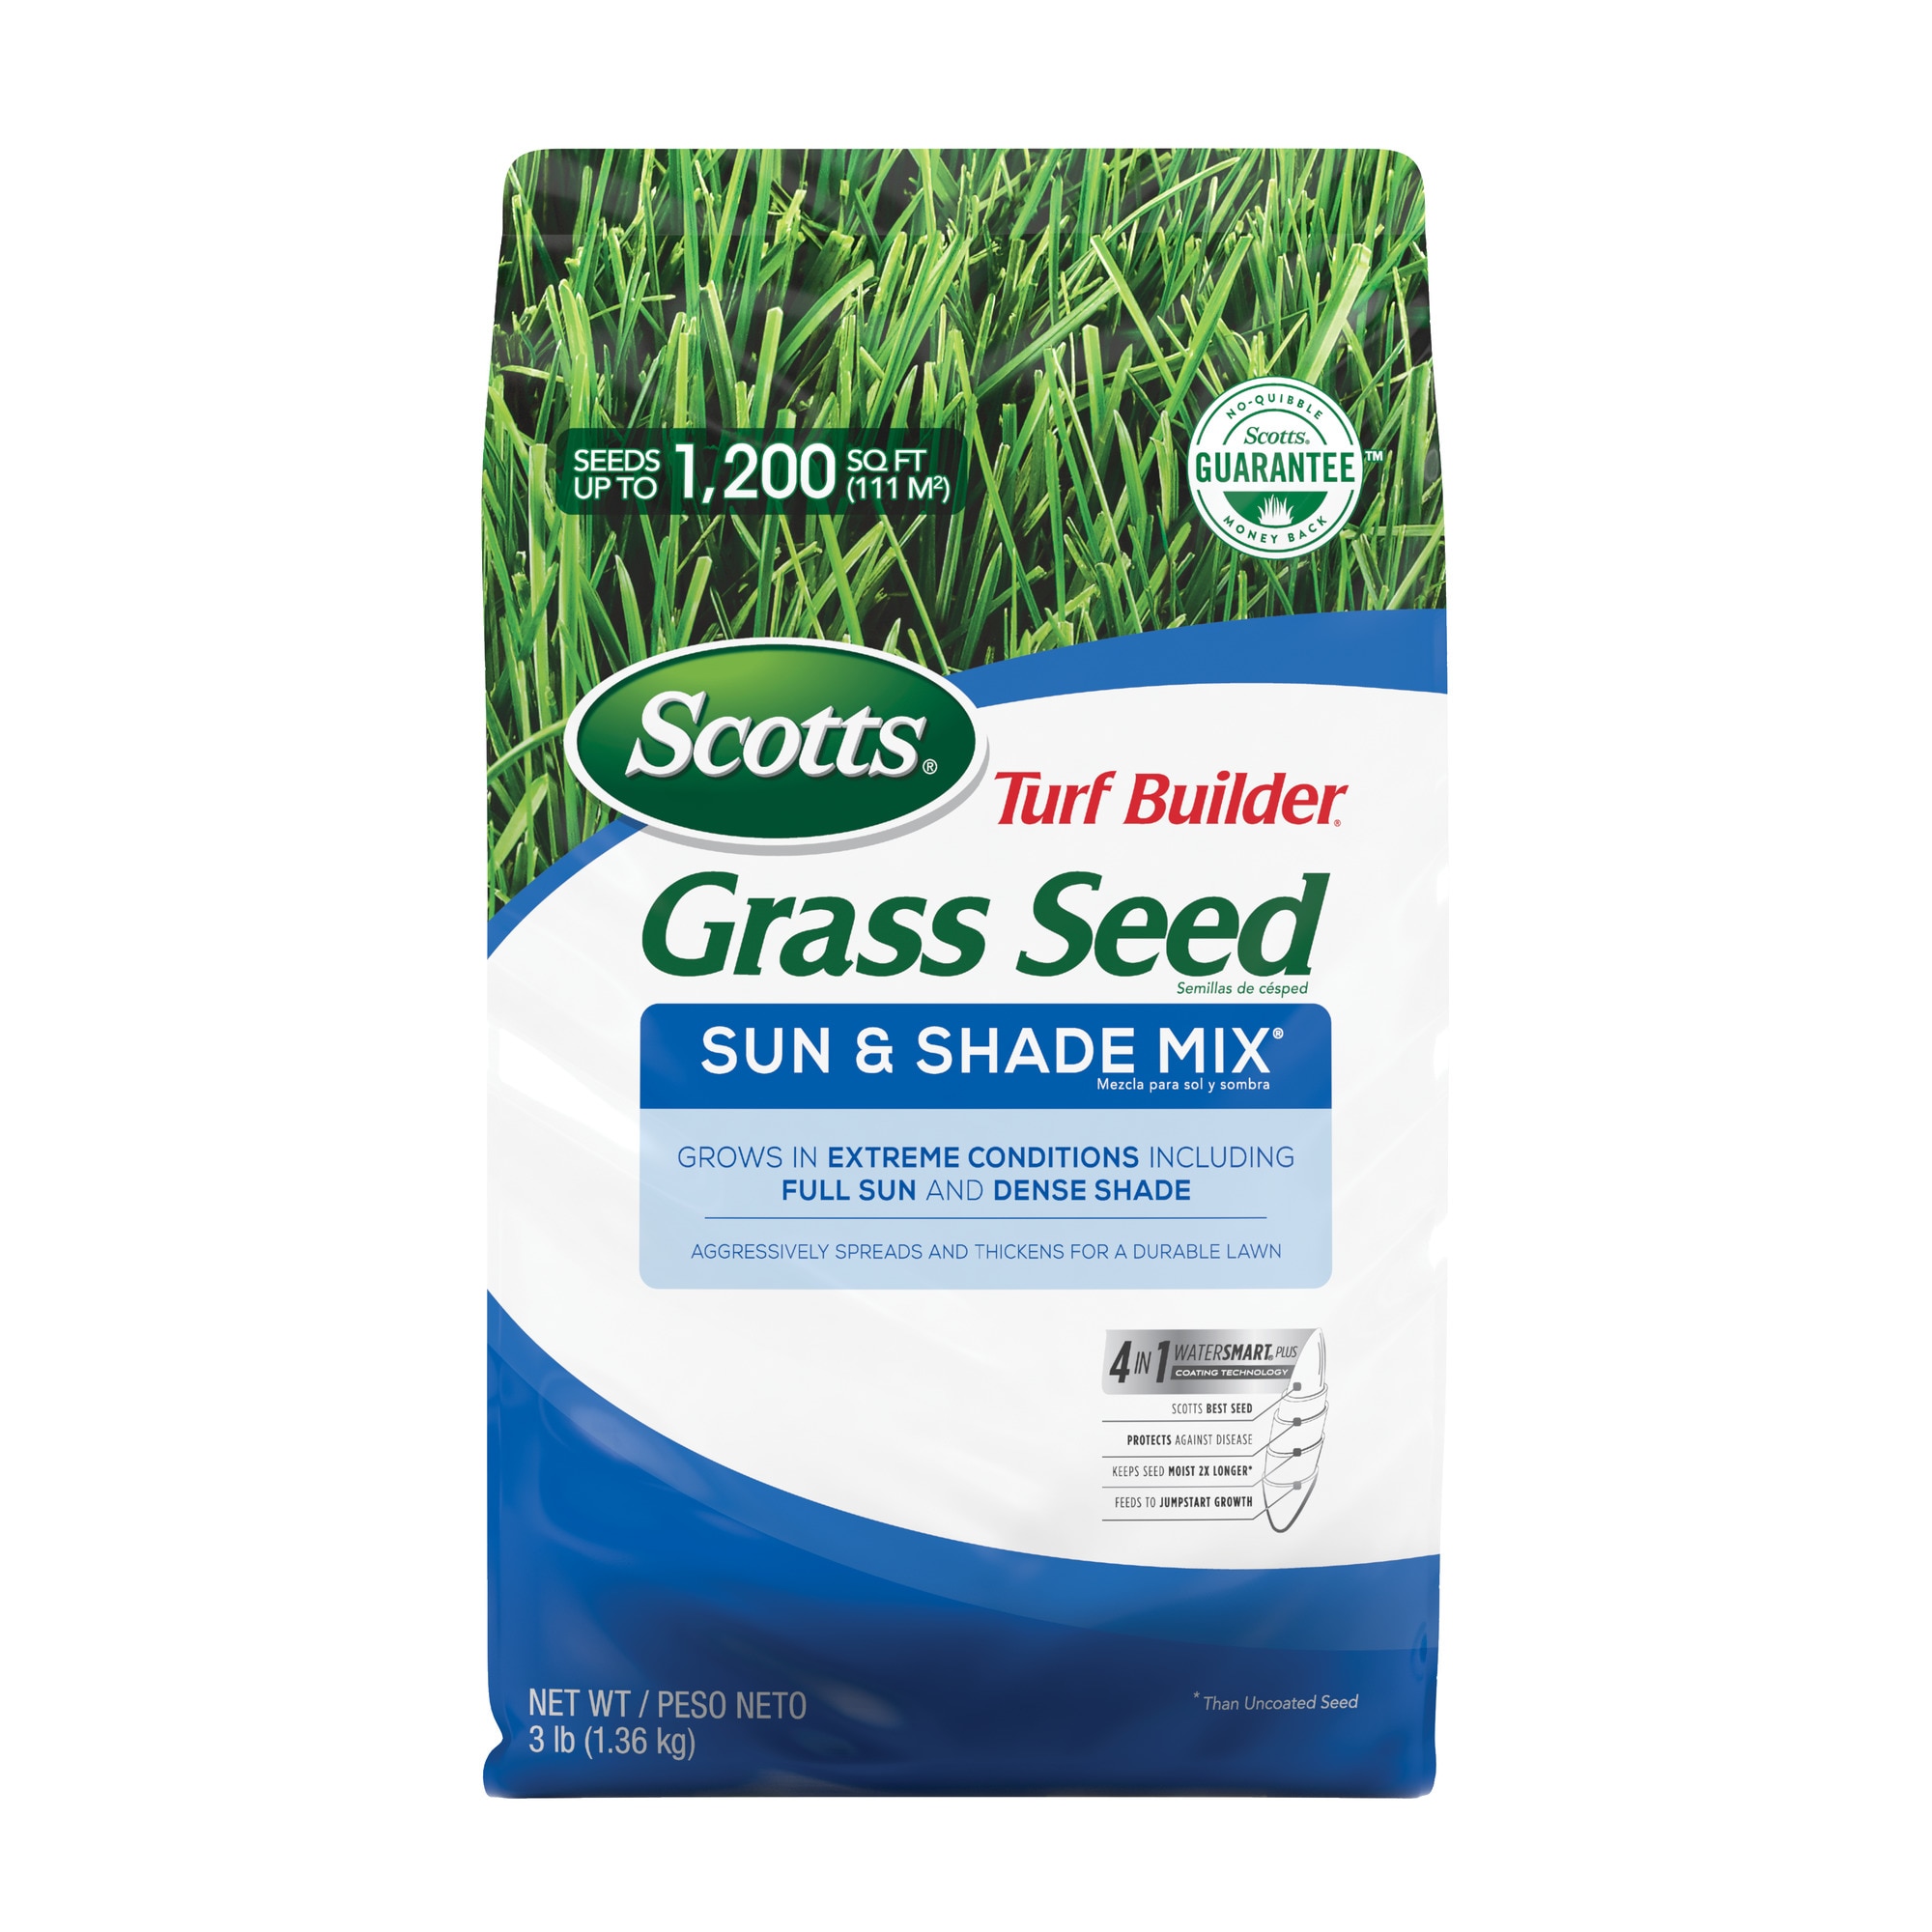 Scotts Turf Builder Grass Seed Sun and Shade Mix 3-Pound Not Sold in Louisia 